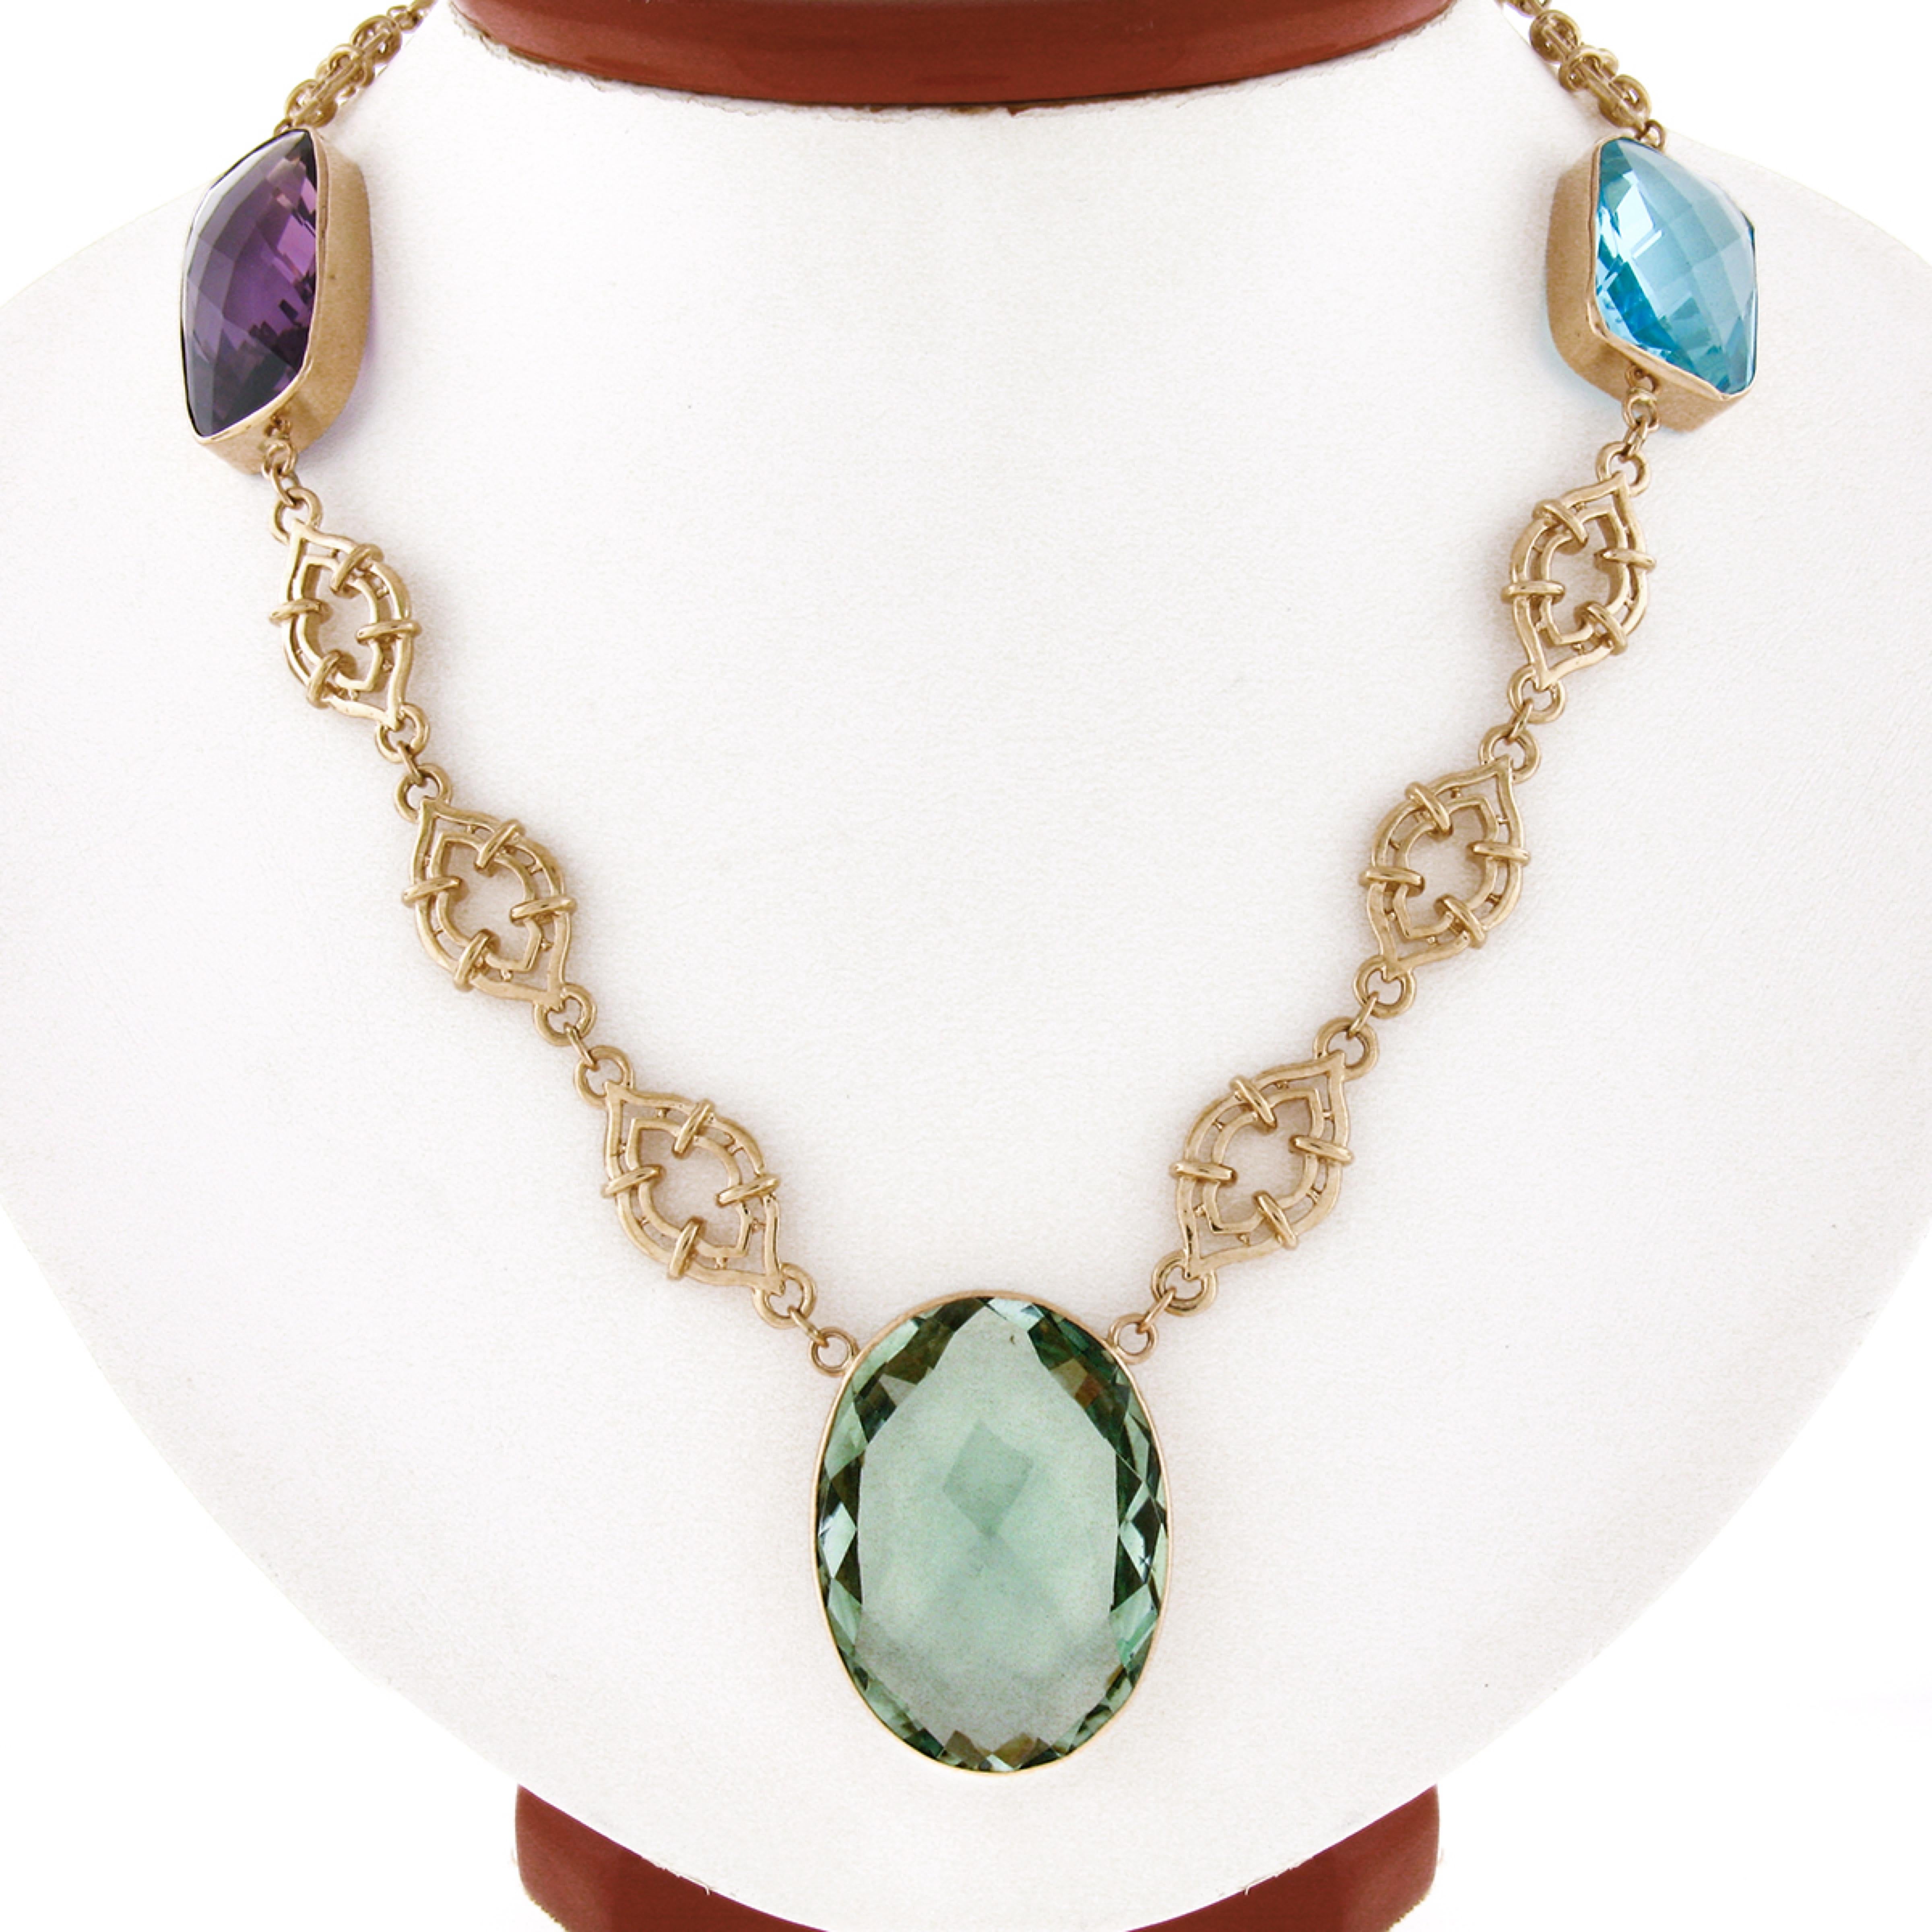 Here we have a magnificent gemstone by the yard statement necklace that is crafted in solid 14k yellow gold. This well made piece is constructed from open fancy links with a nice high-polished finish throughout with large, fine quality, natural